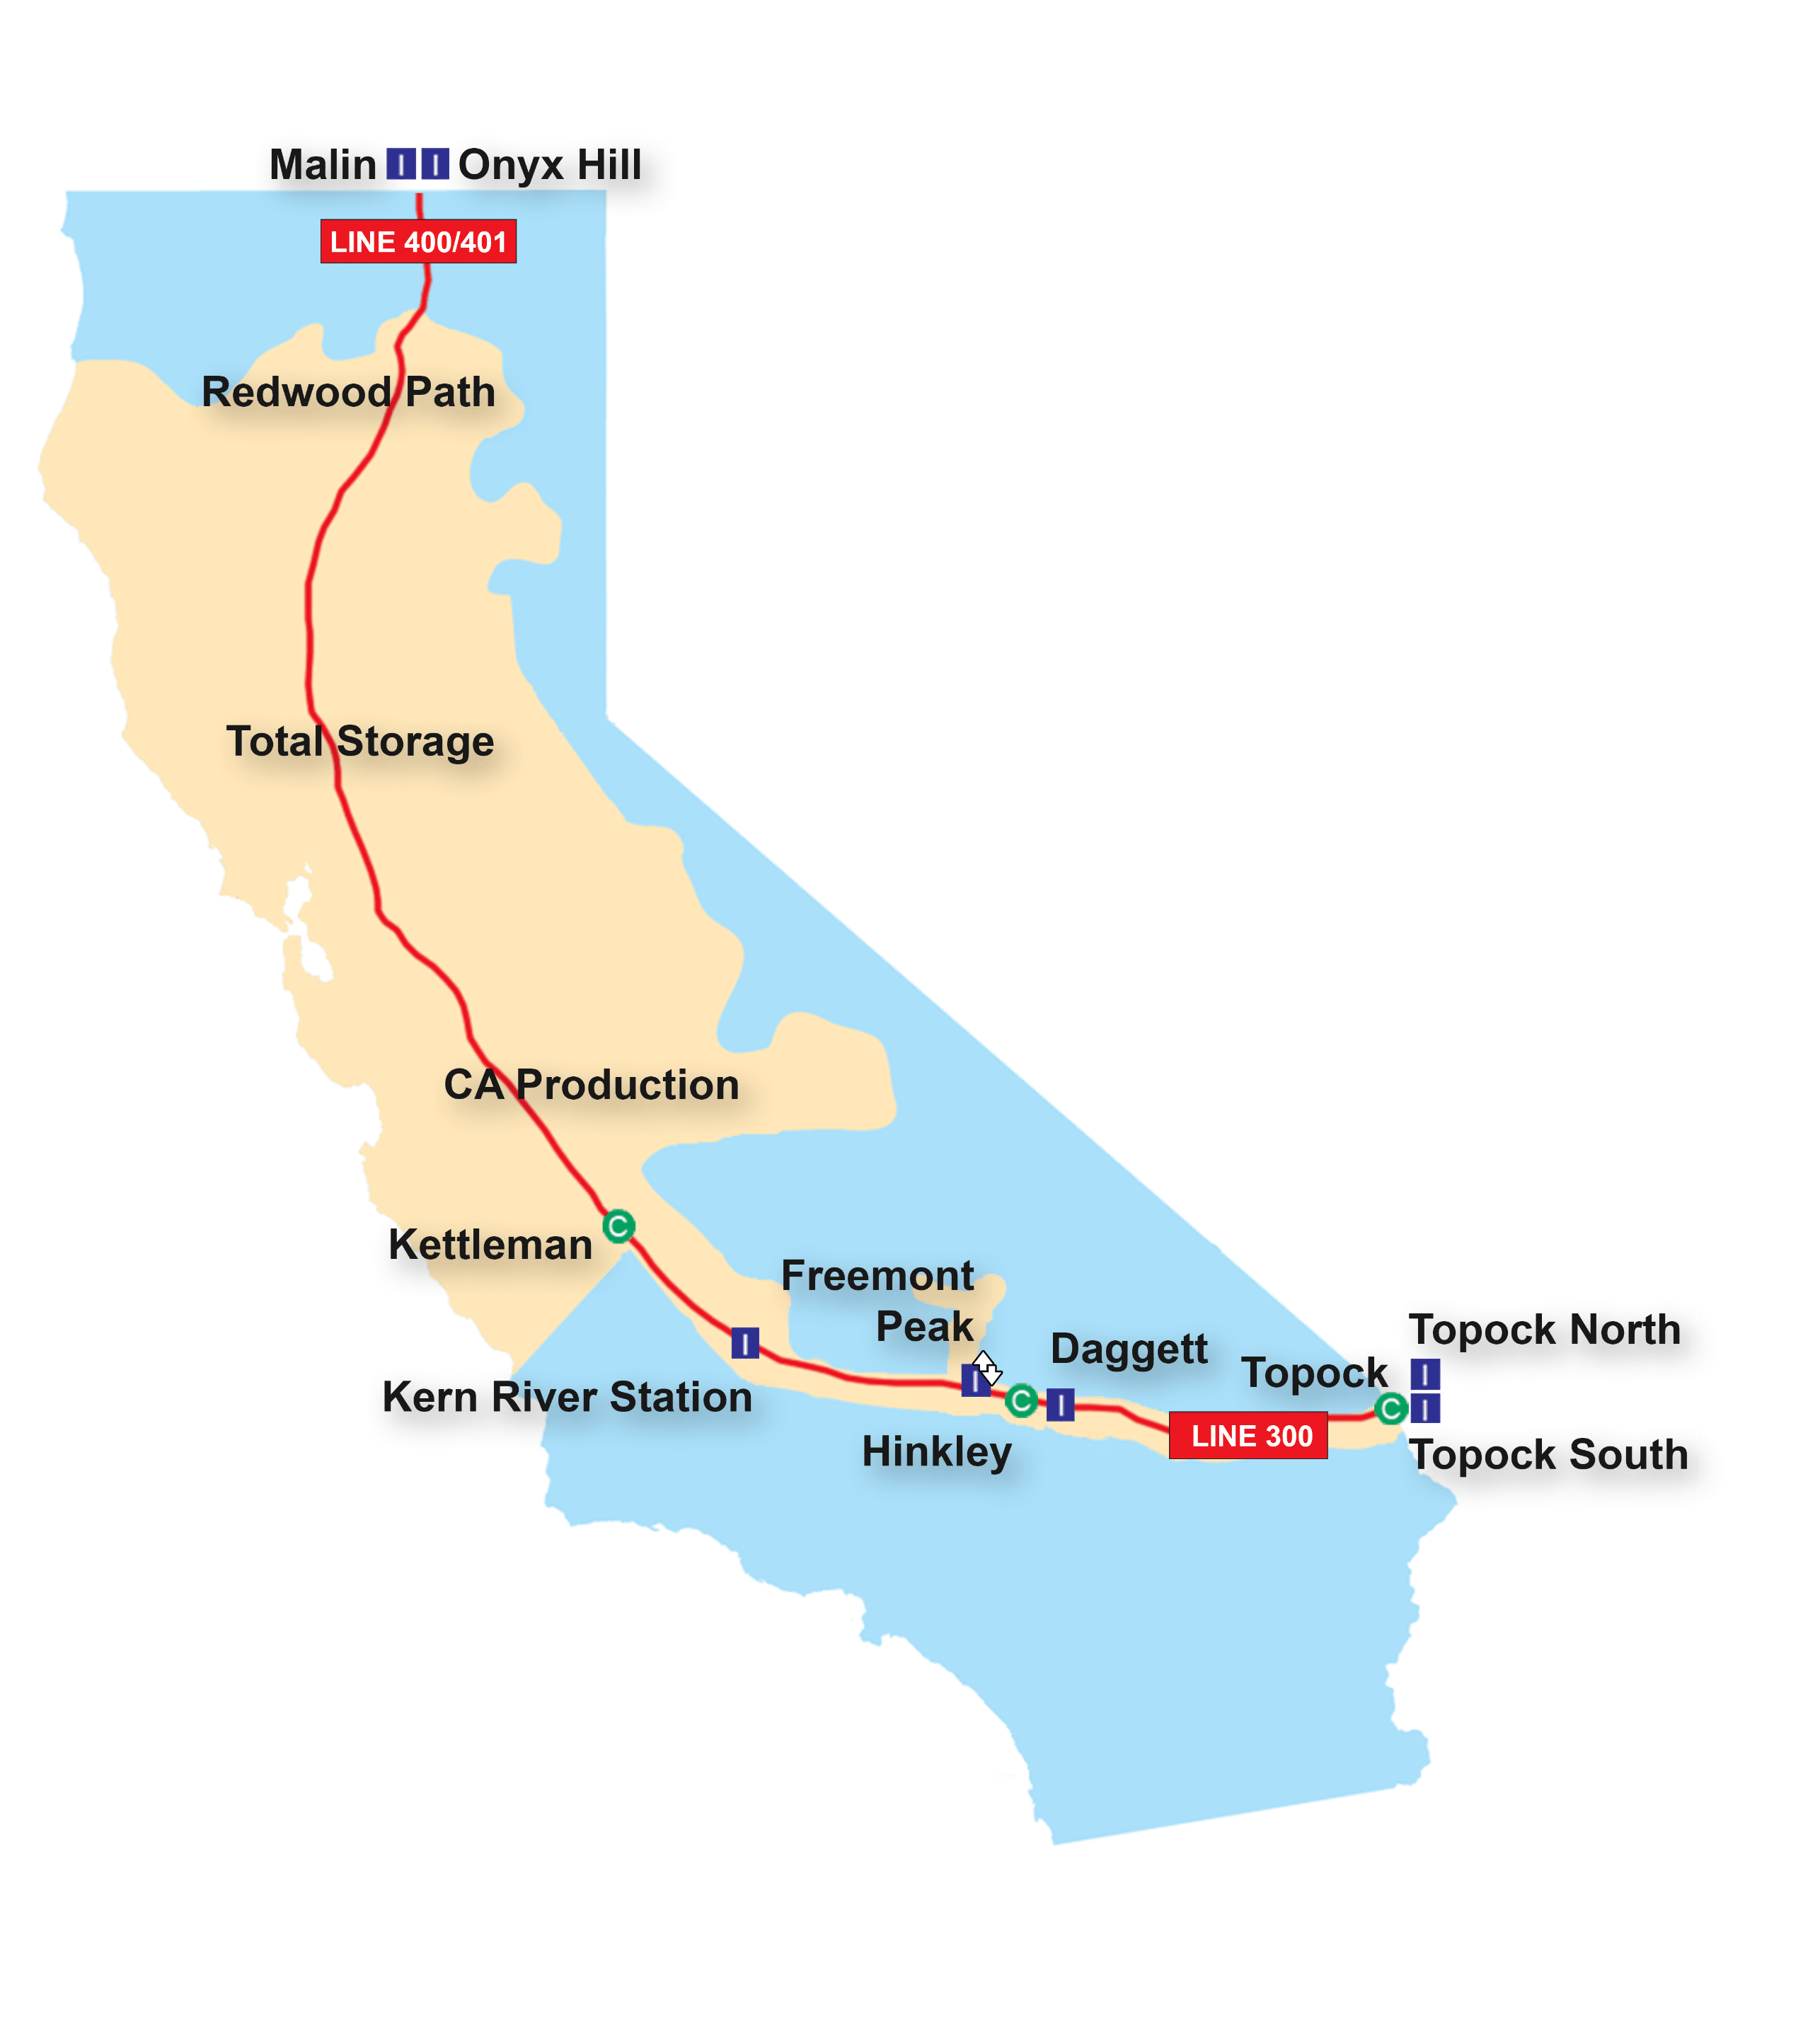 A graphic drawing depicts a pipeline running from the southern part of California to the northern part.